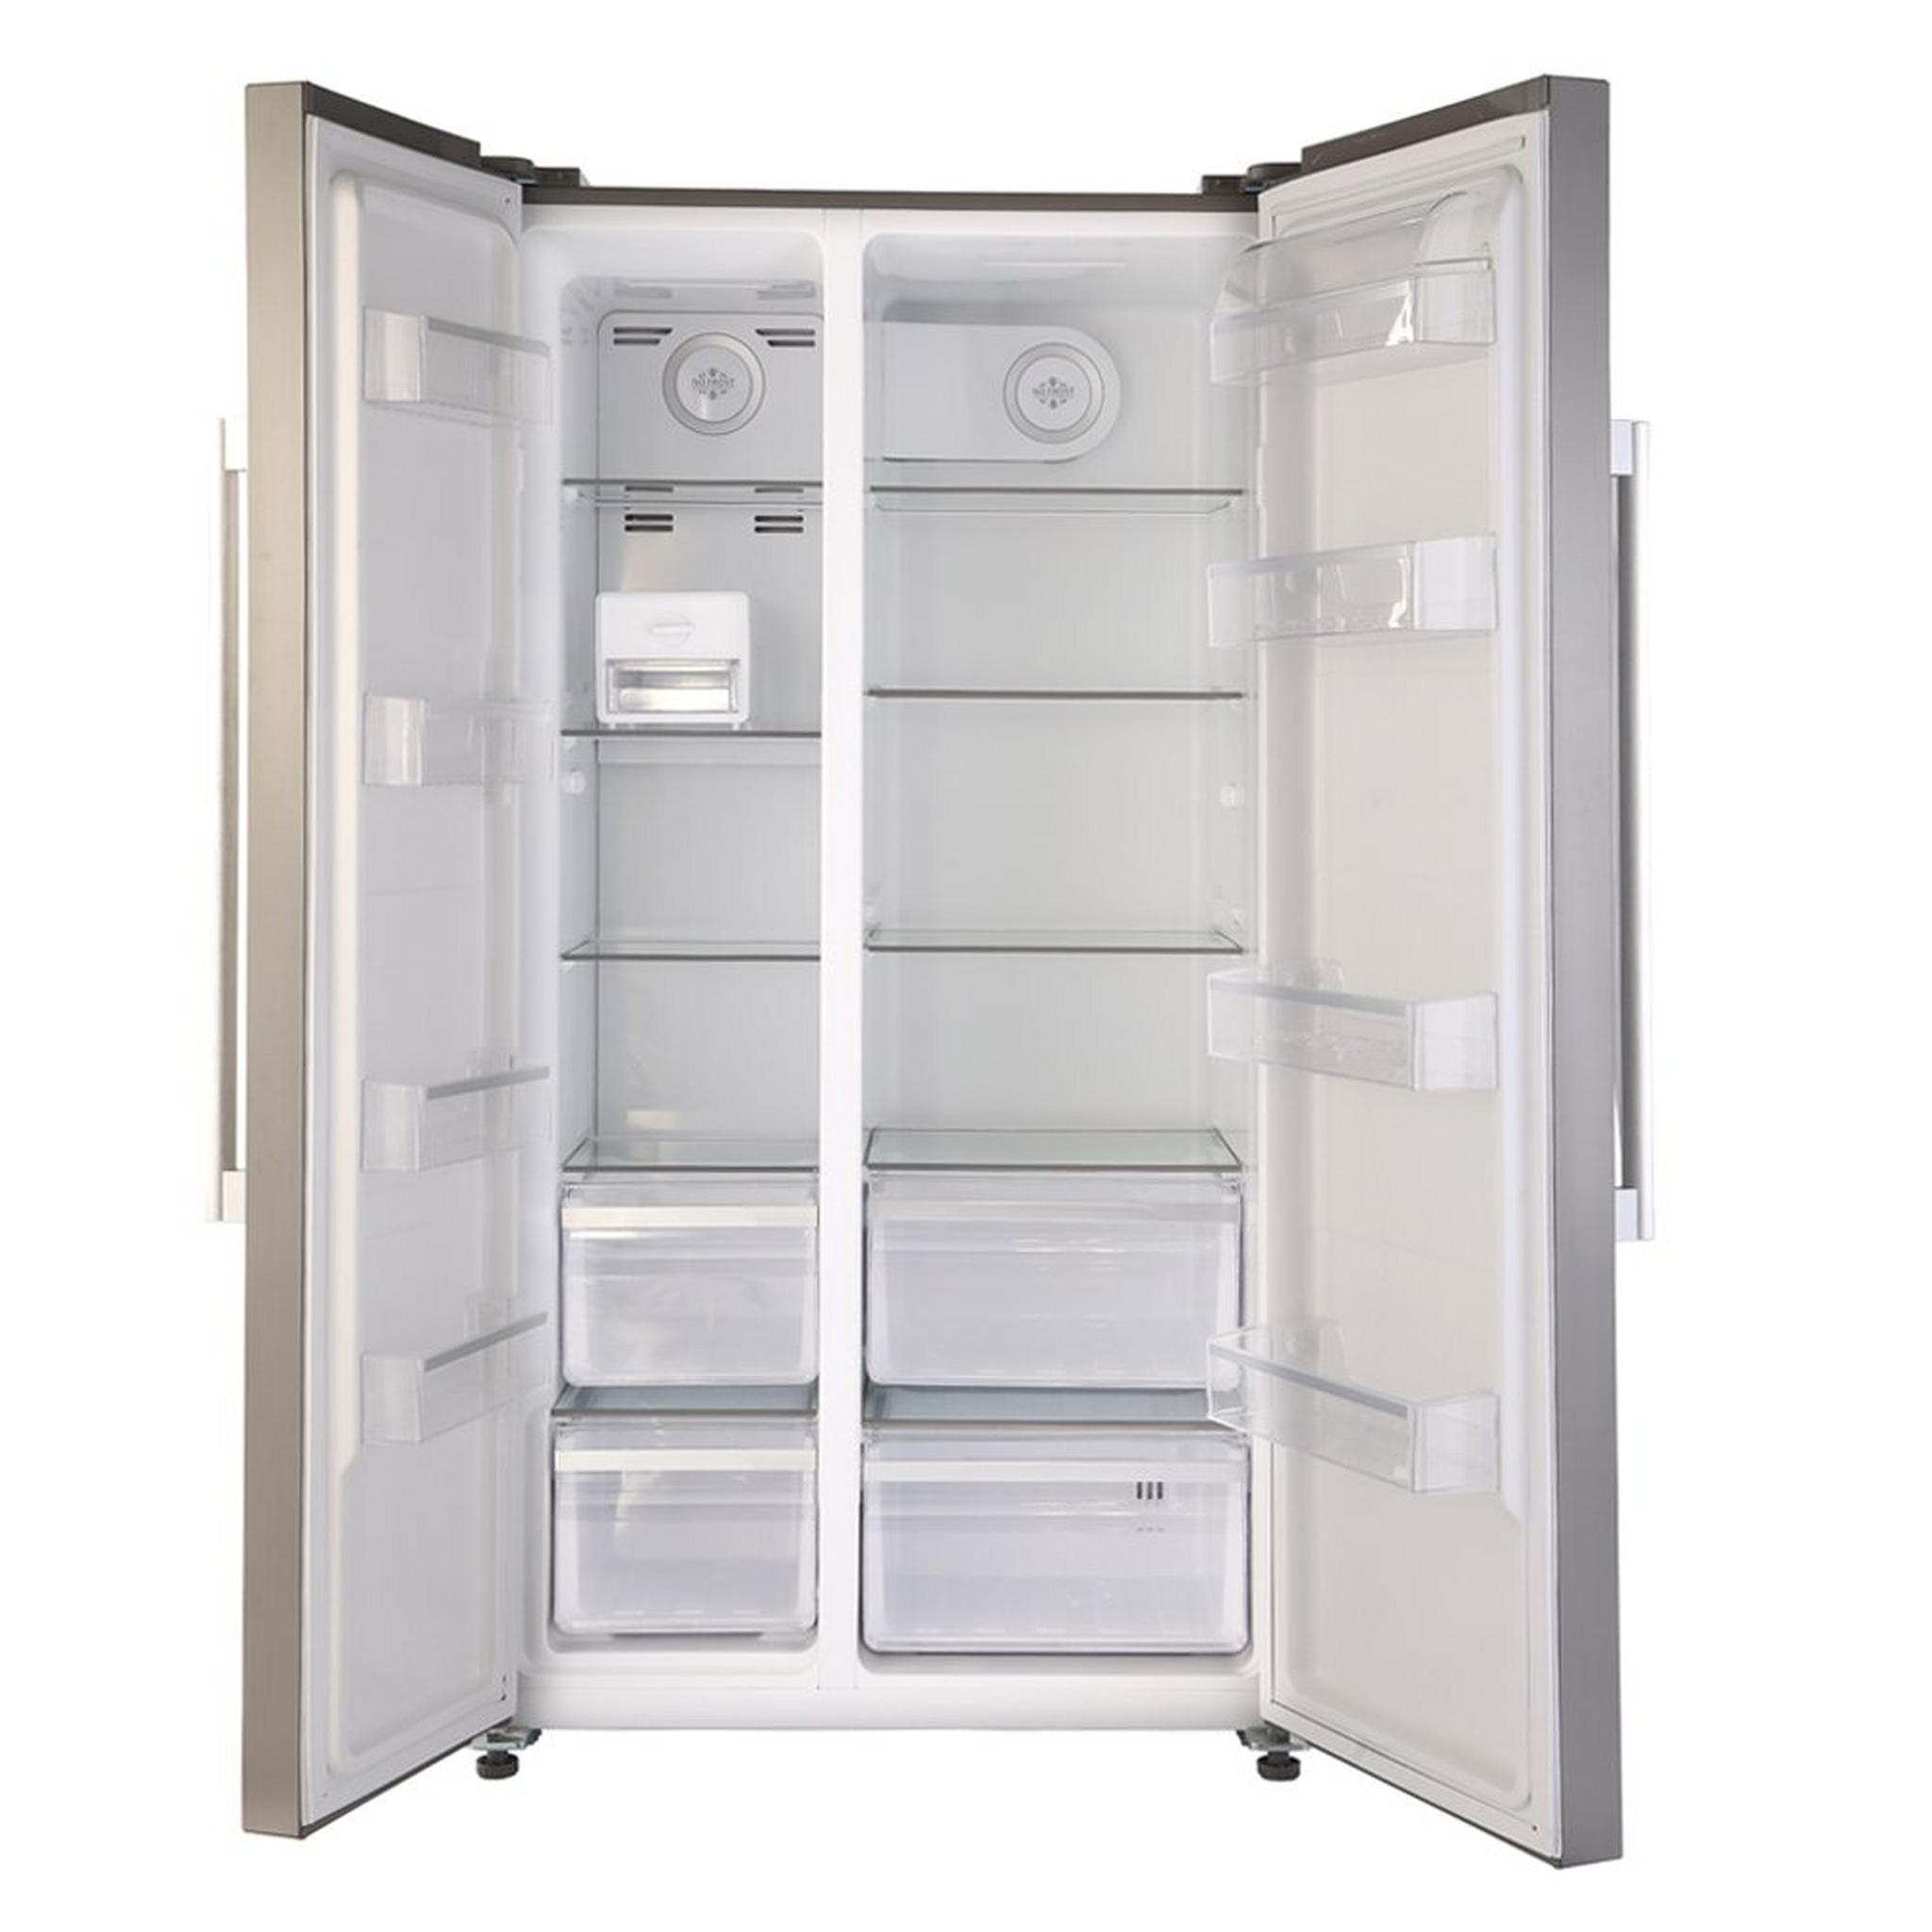 Wansa 20 CFT Side By Side Refrigerator and Freezer - Grey (WRSG-563-NFIC82)